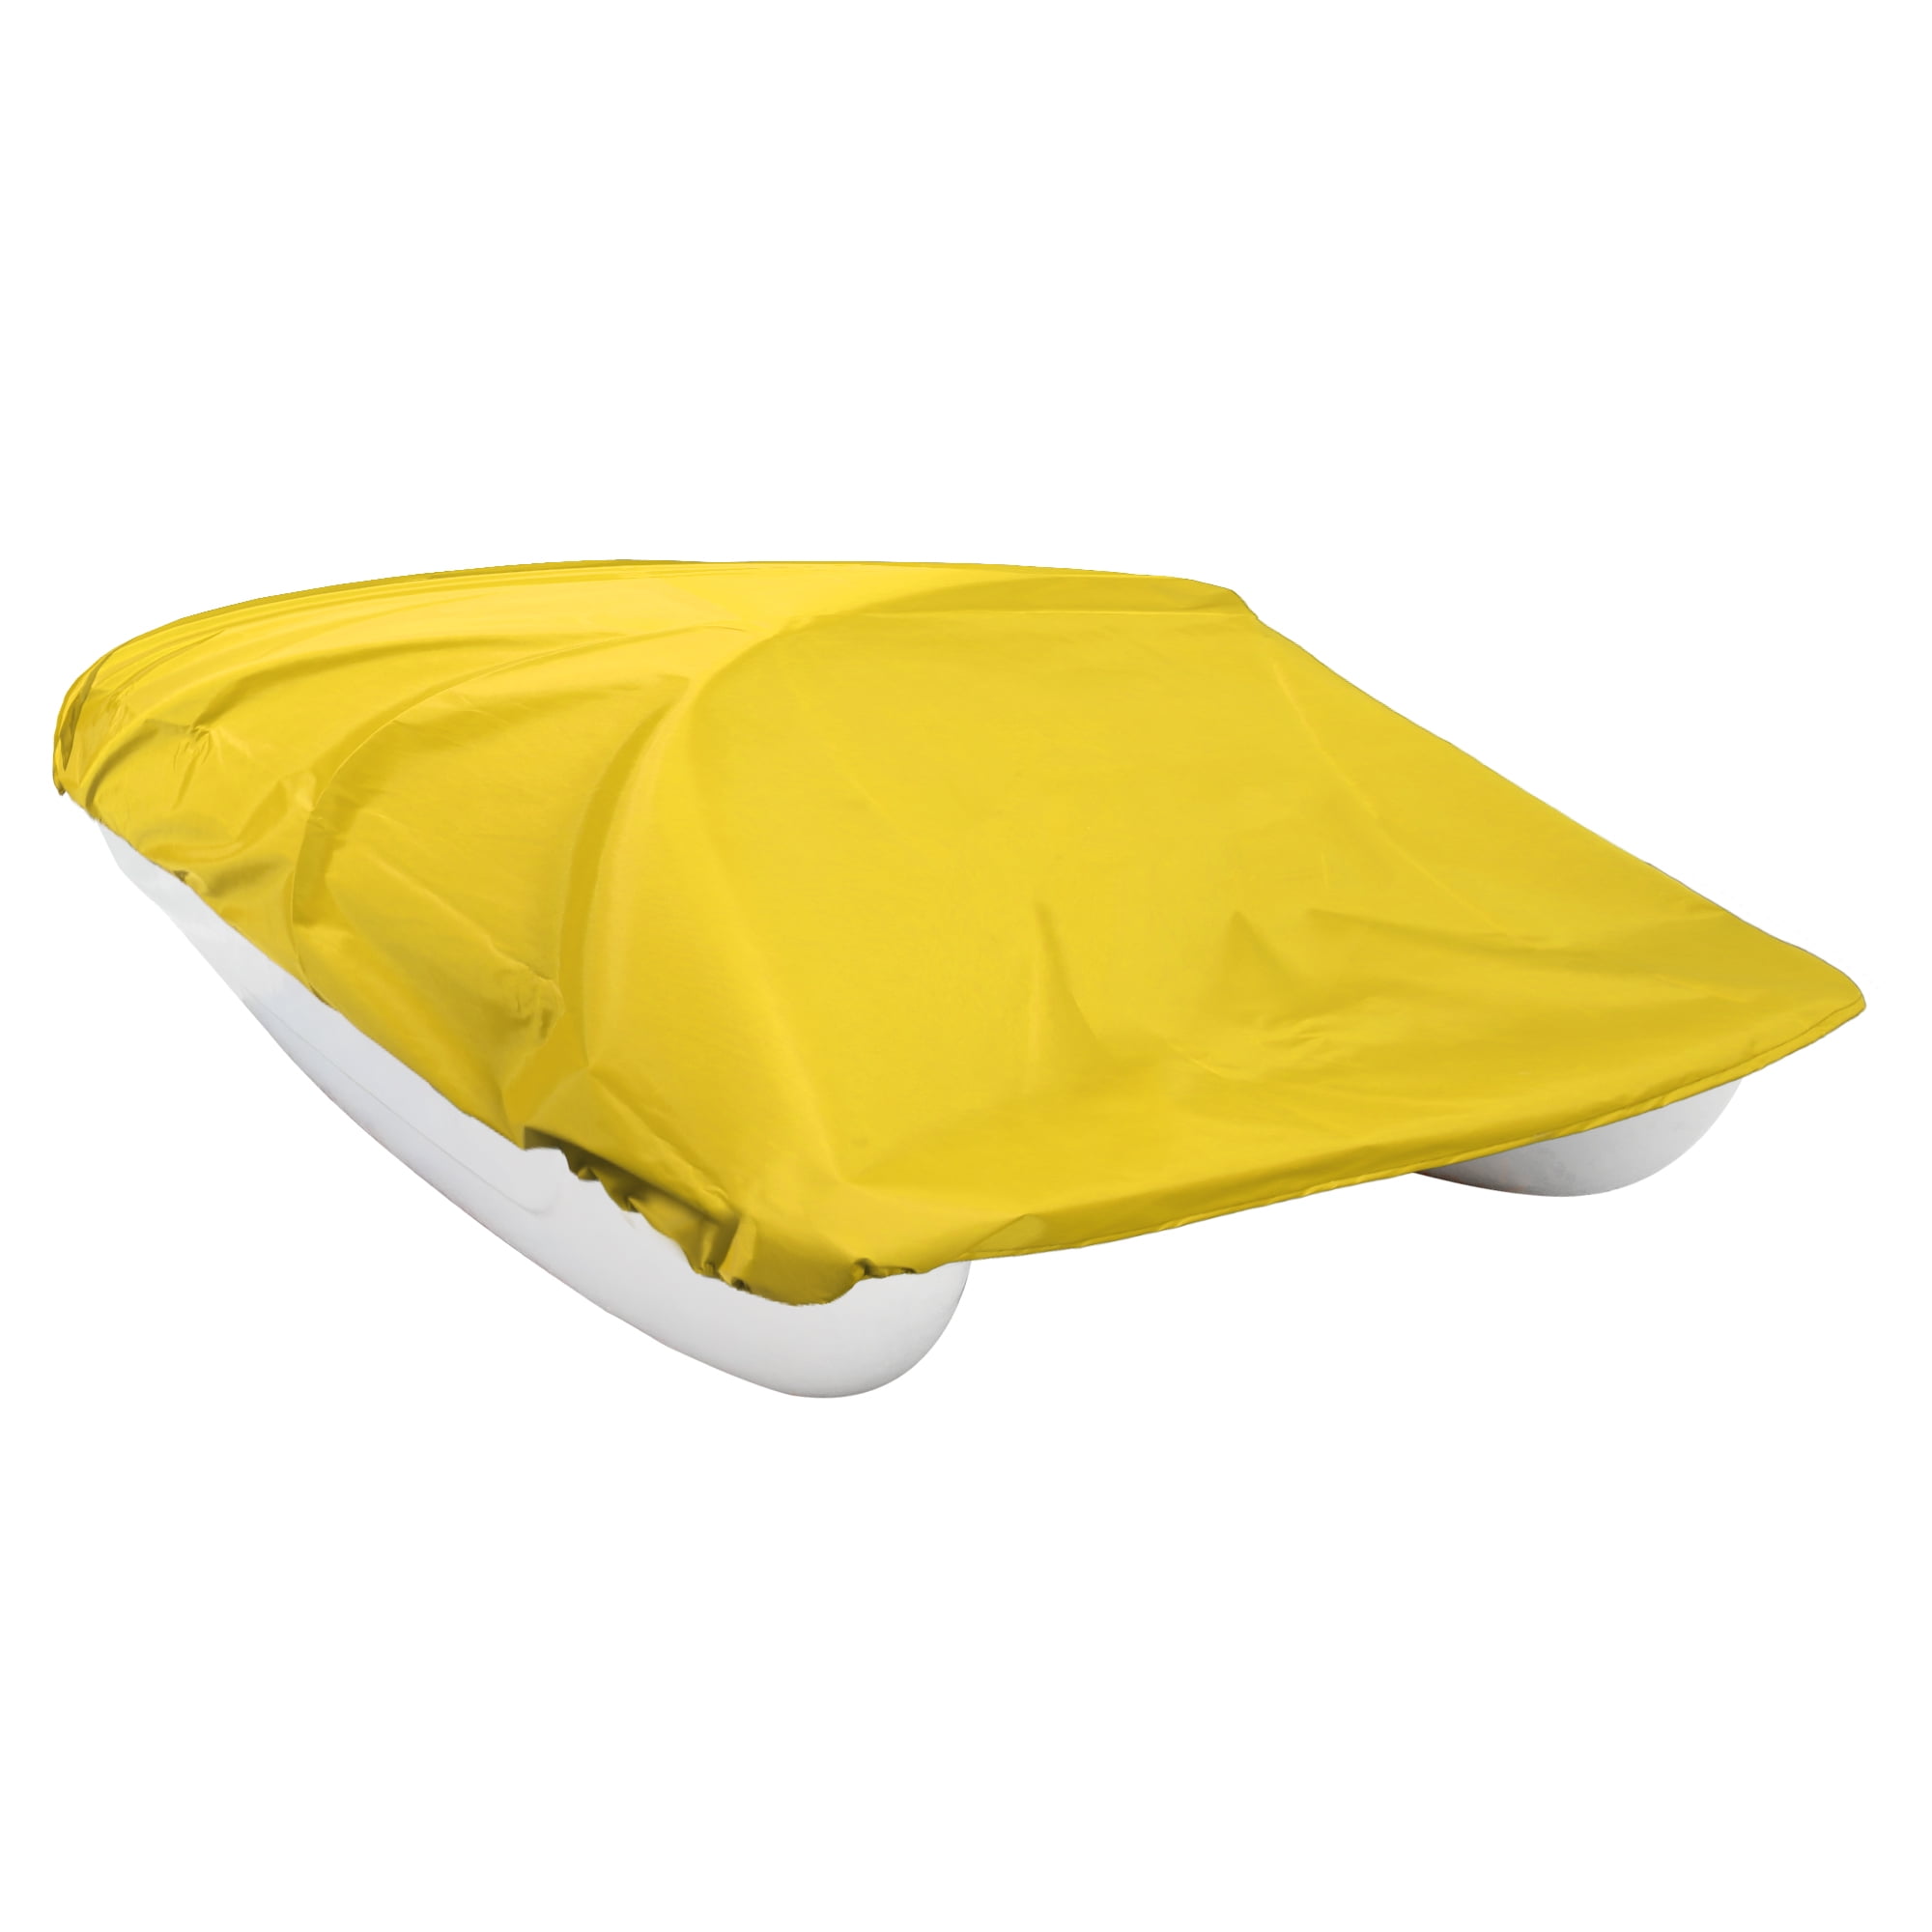 Boat Cover Yacht Boat Center Console Cover Mat Waterproof